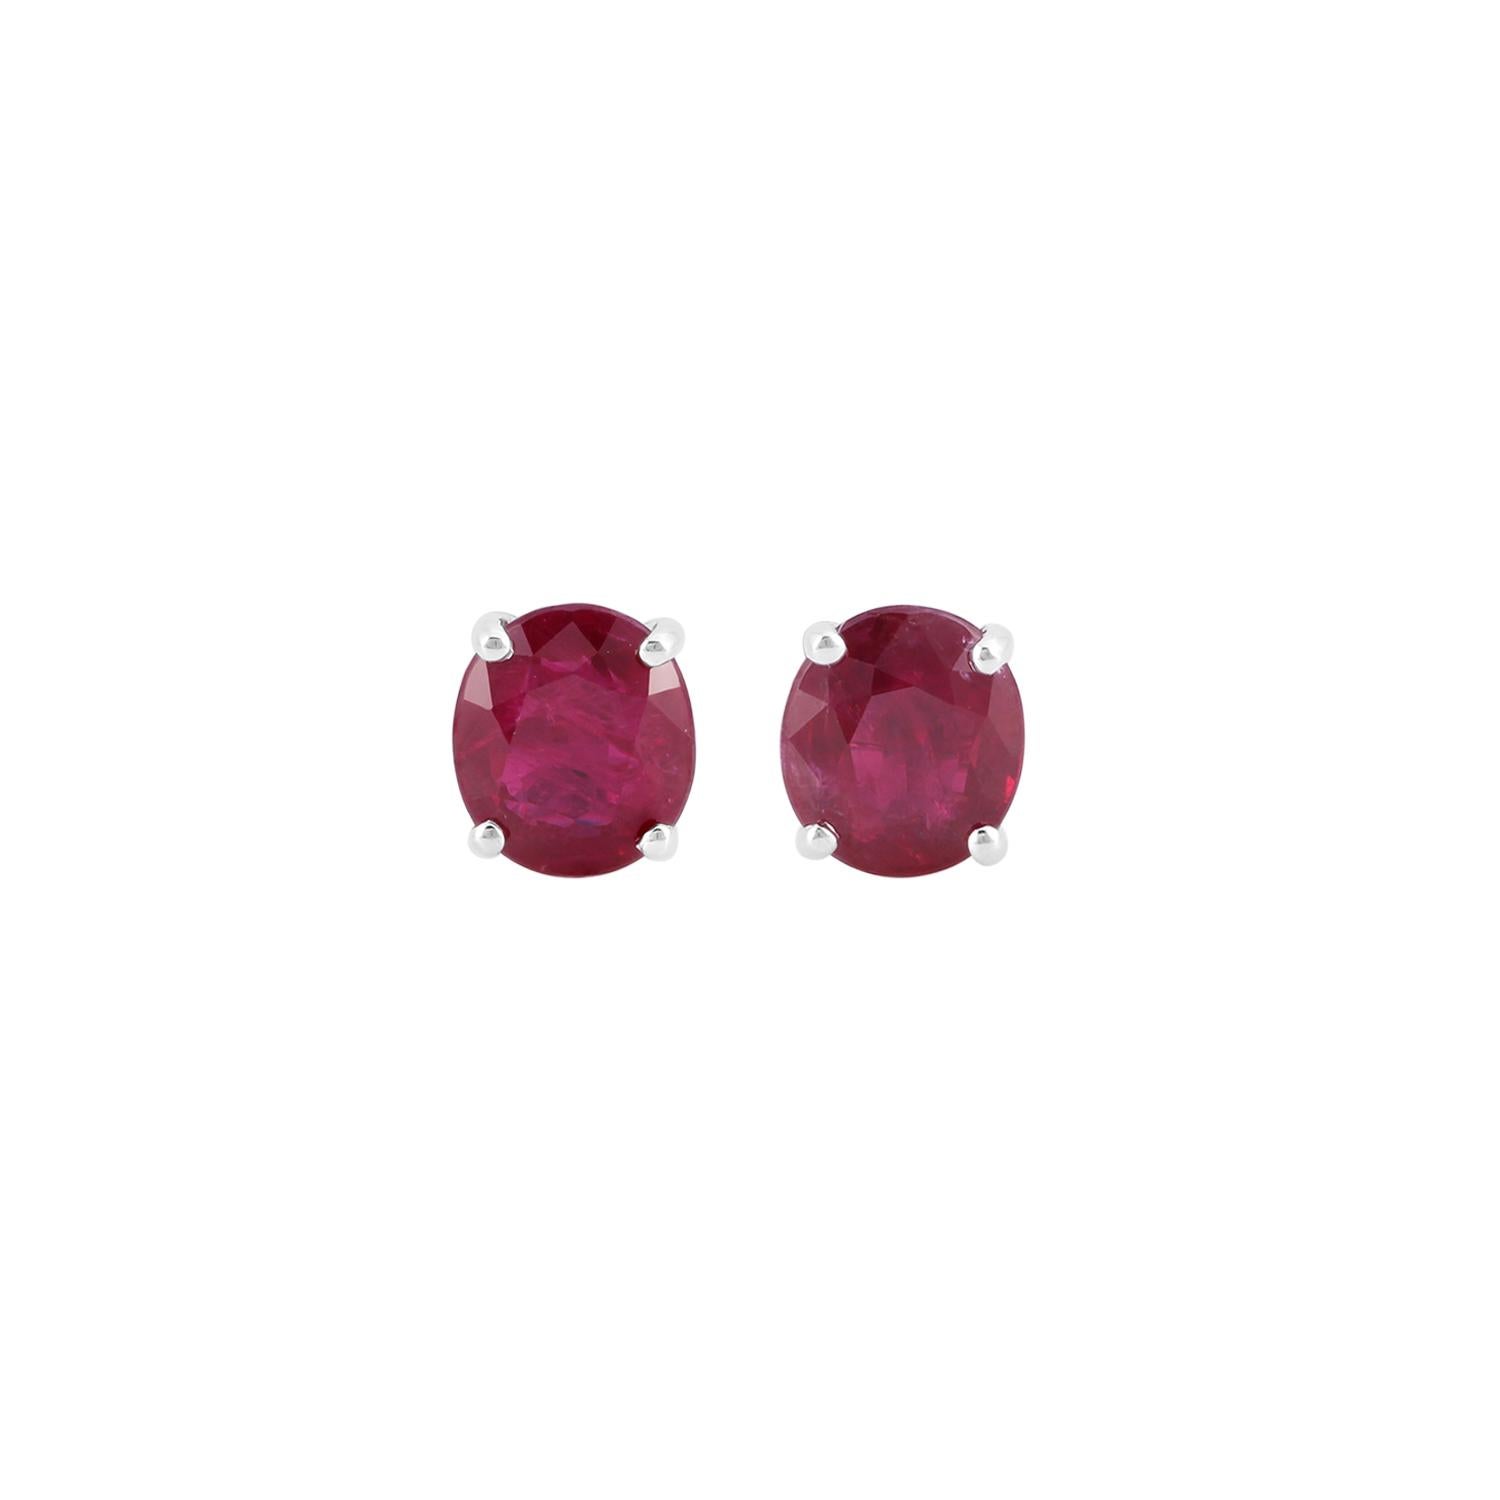 Magnificent Mozambique Ruby Stud Earrings
Mozambique Ruby approx. 2.1 CTS
18k White gold mounting 1.63 Gms

Custom Services
Request Customization